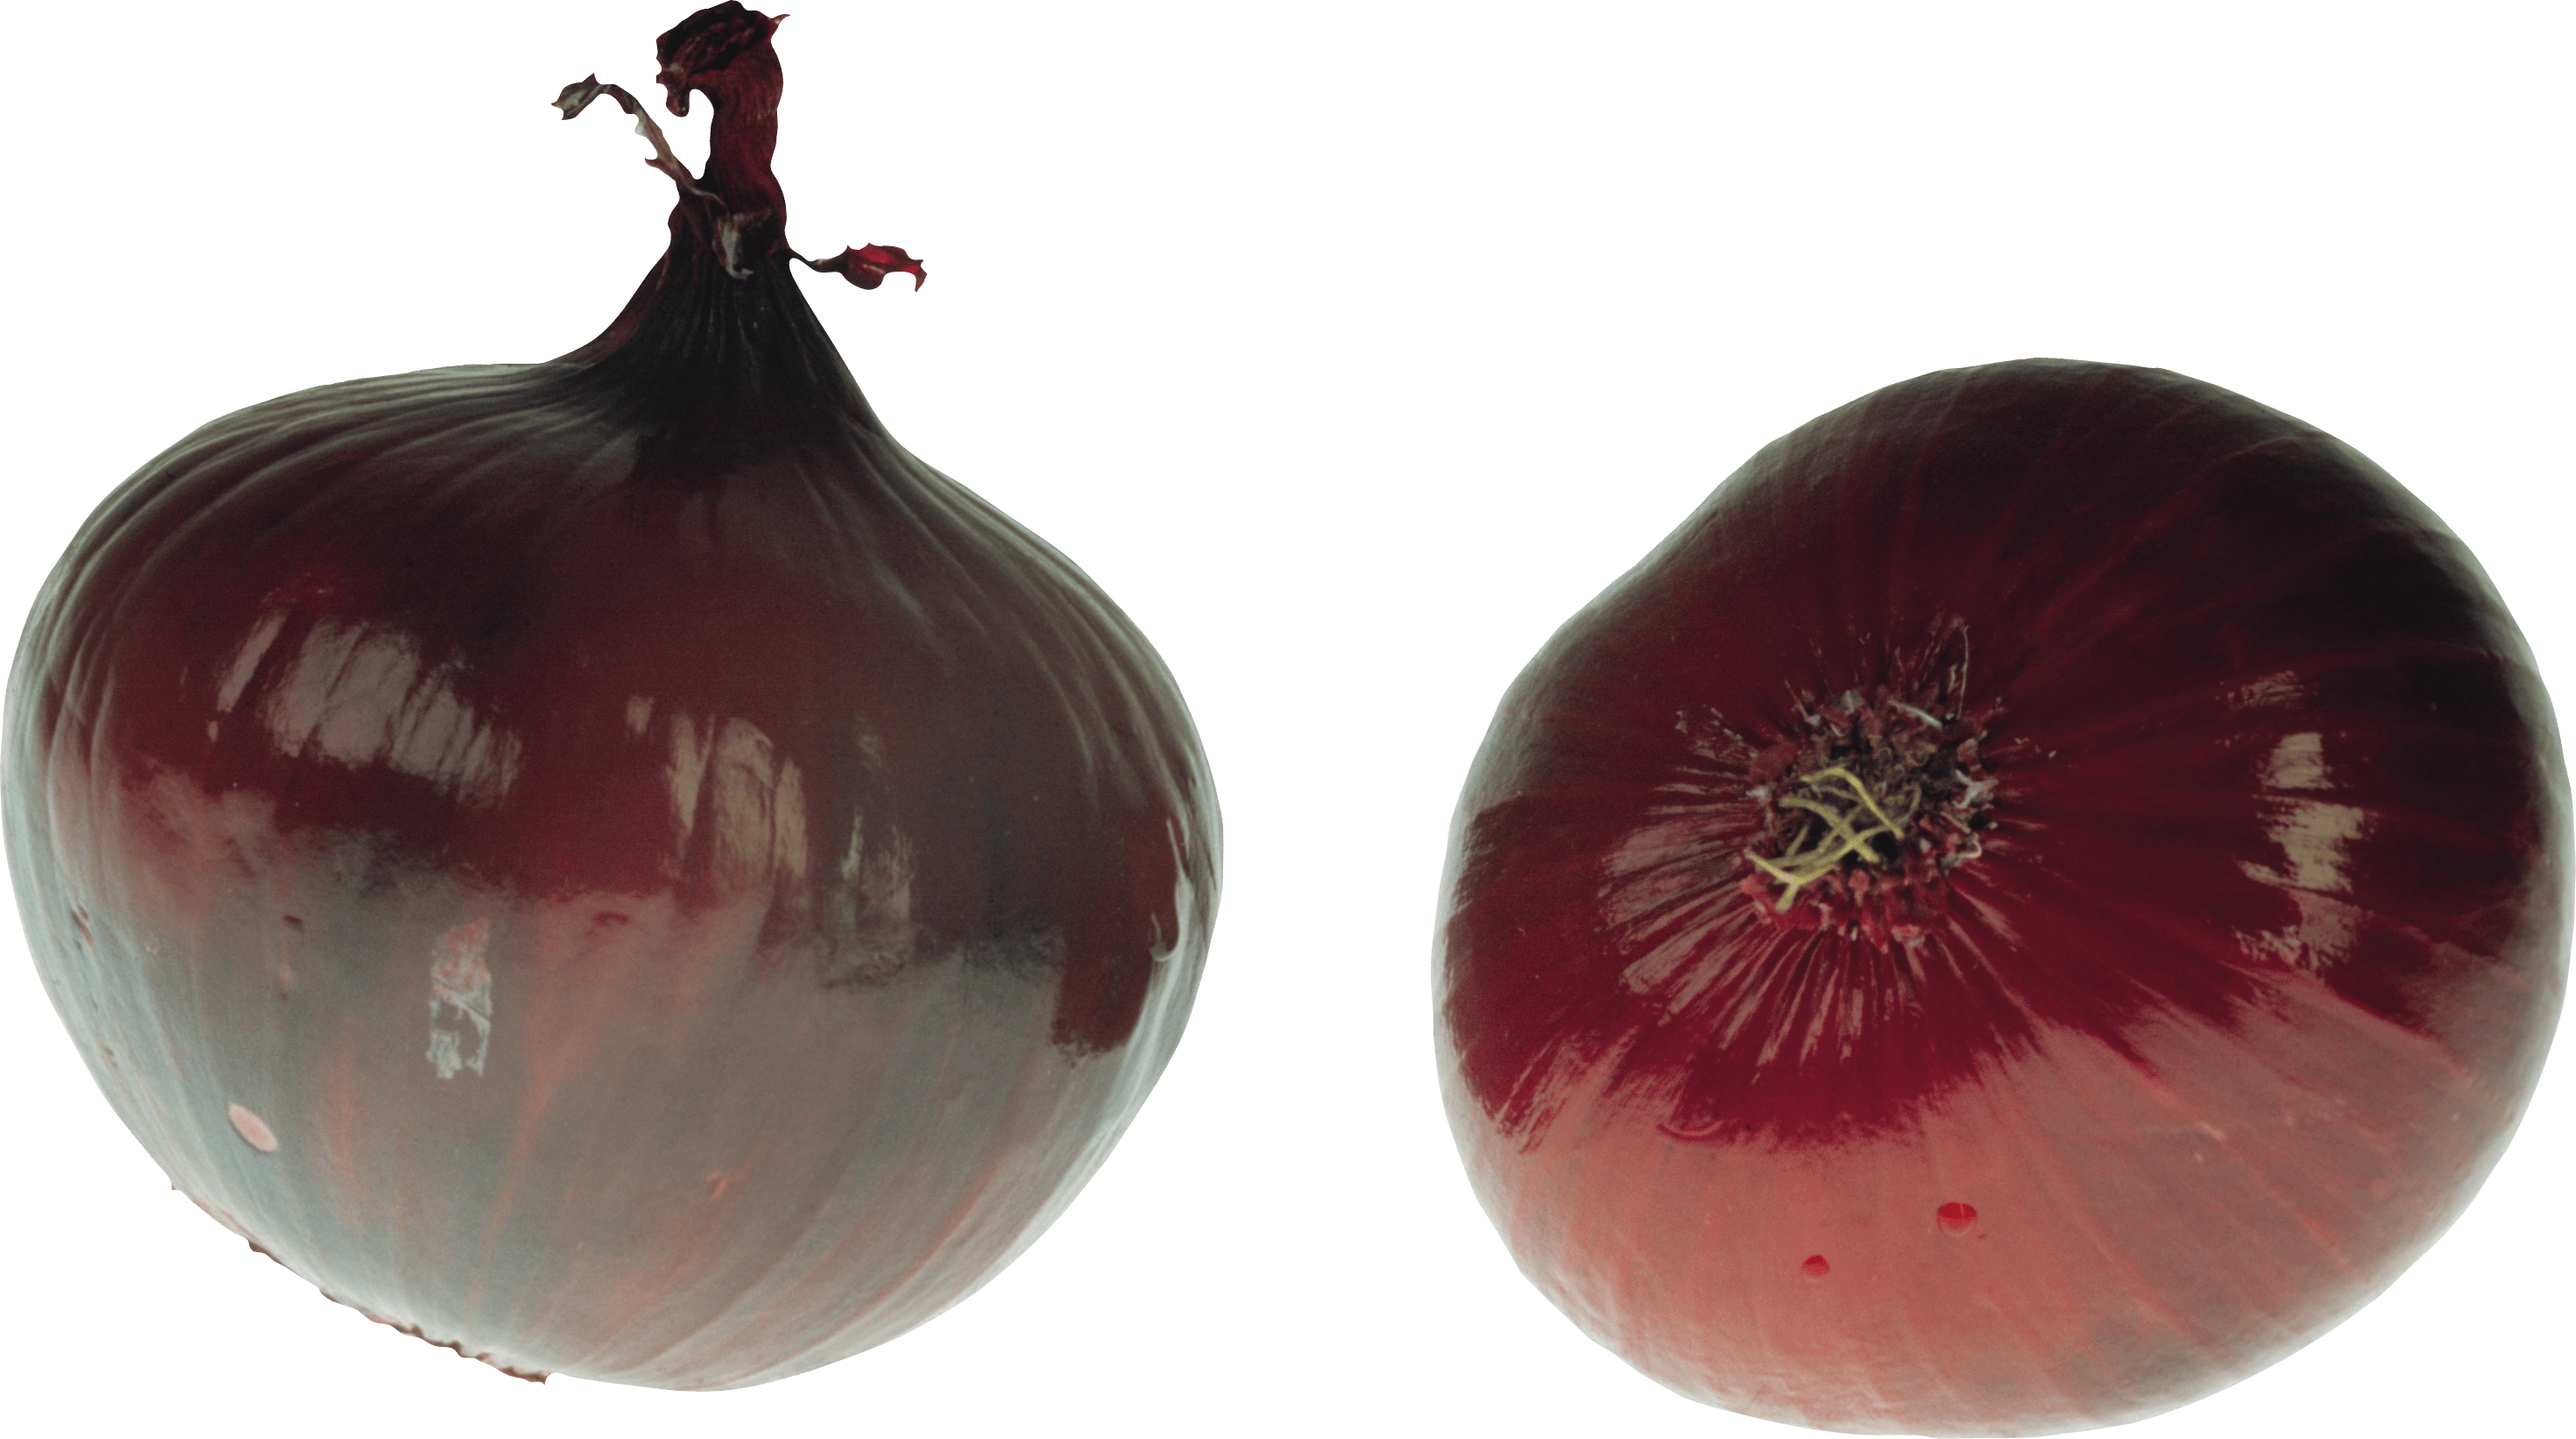 Onion Png Image PNG Image